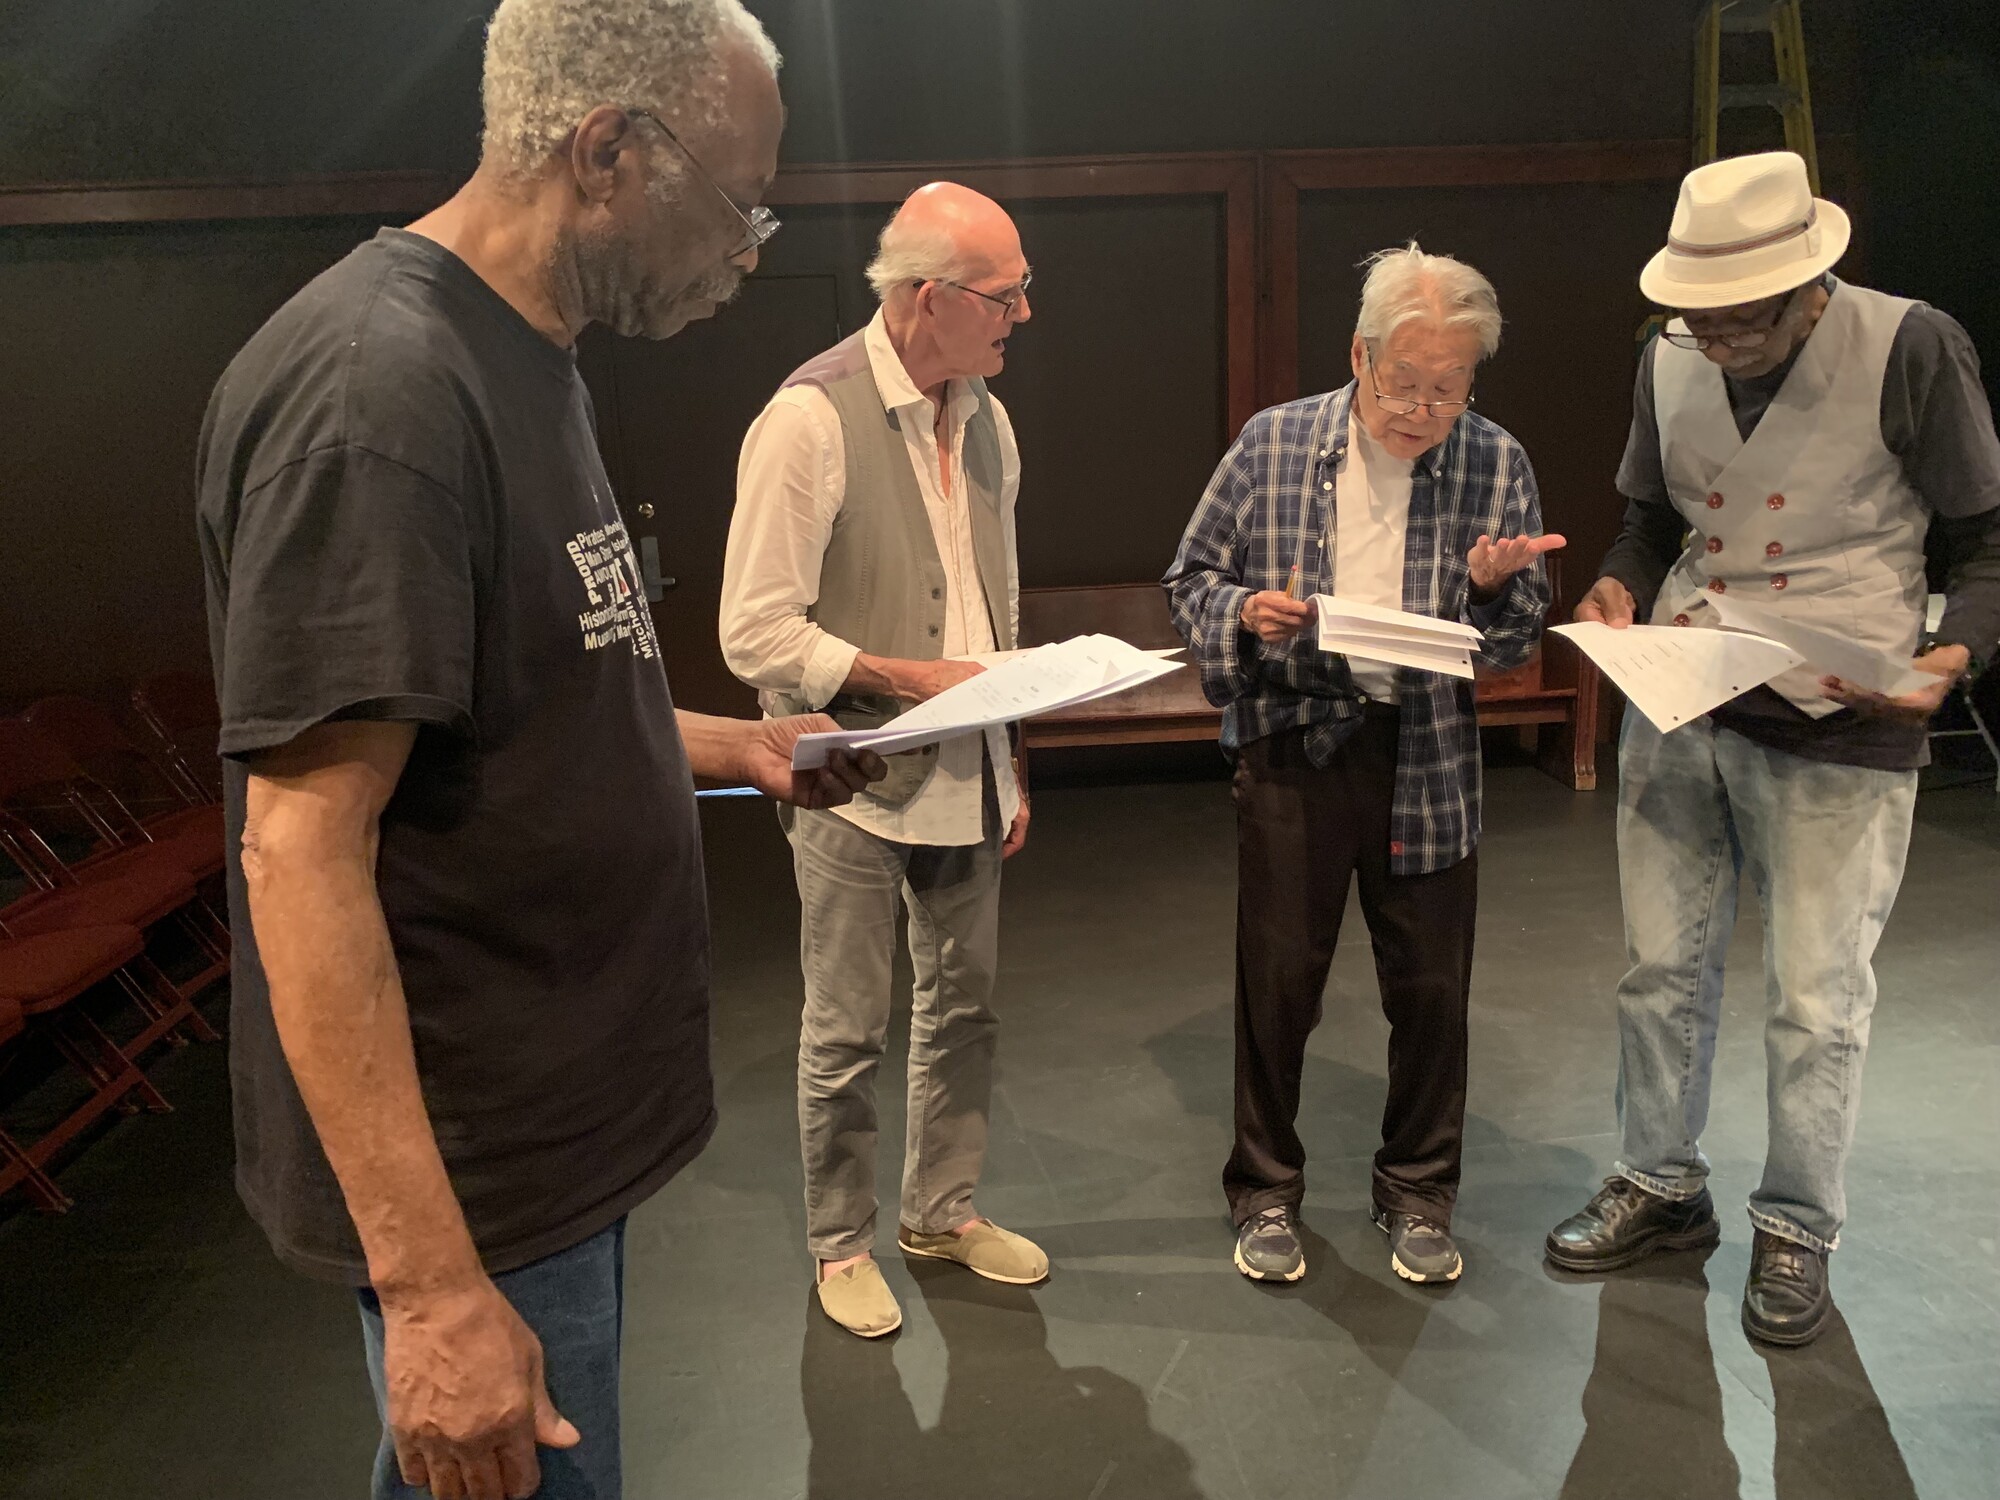 Four senior actors stand on-stage and look at their scripts during a rehearsal.